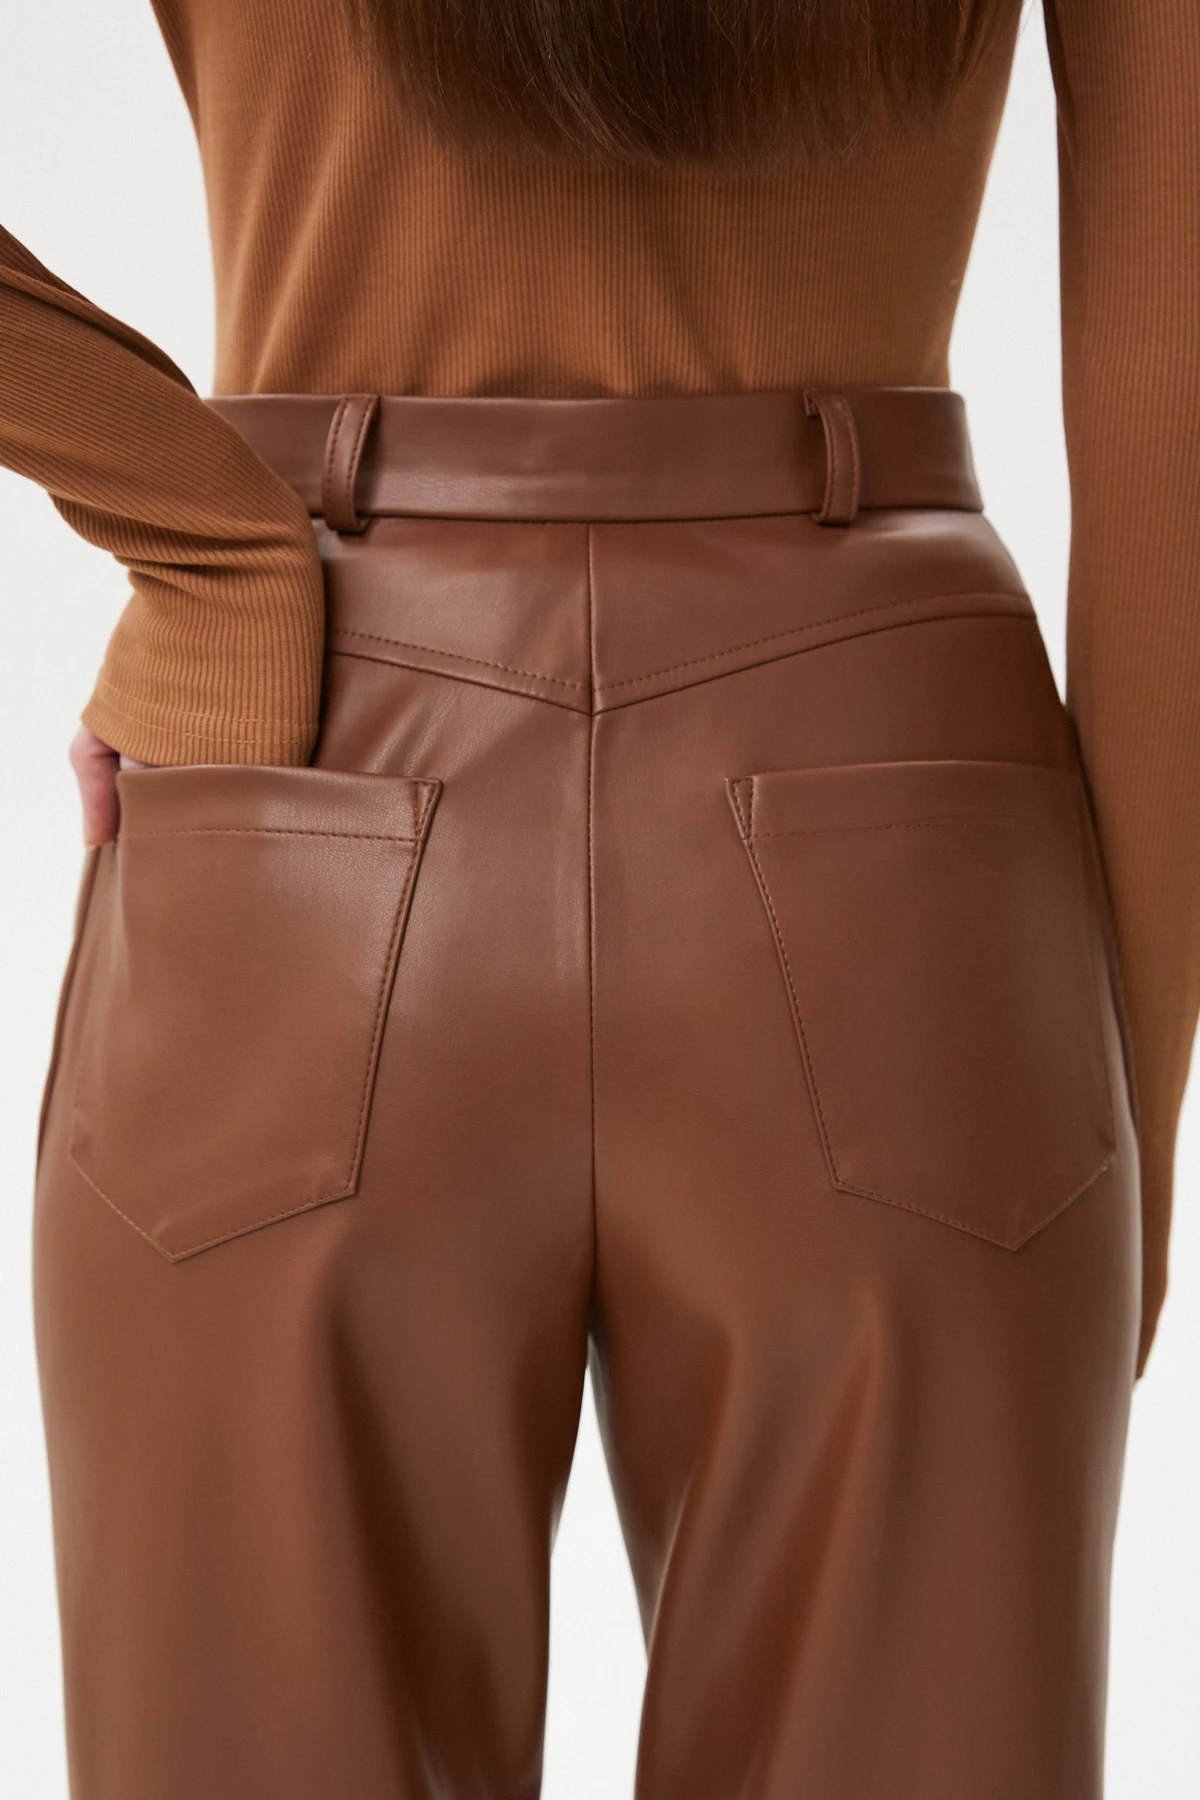 Brown cropped pants made of eco-leather, photo 4